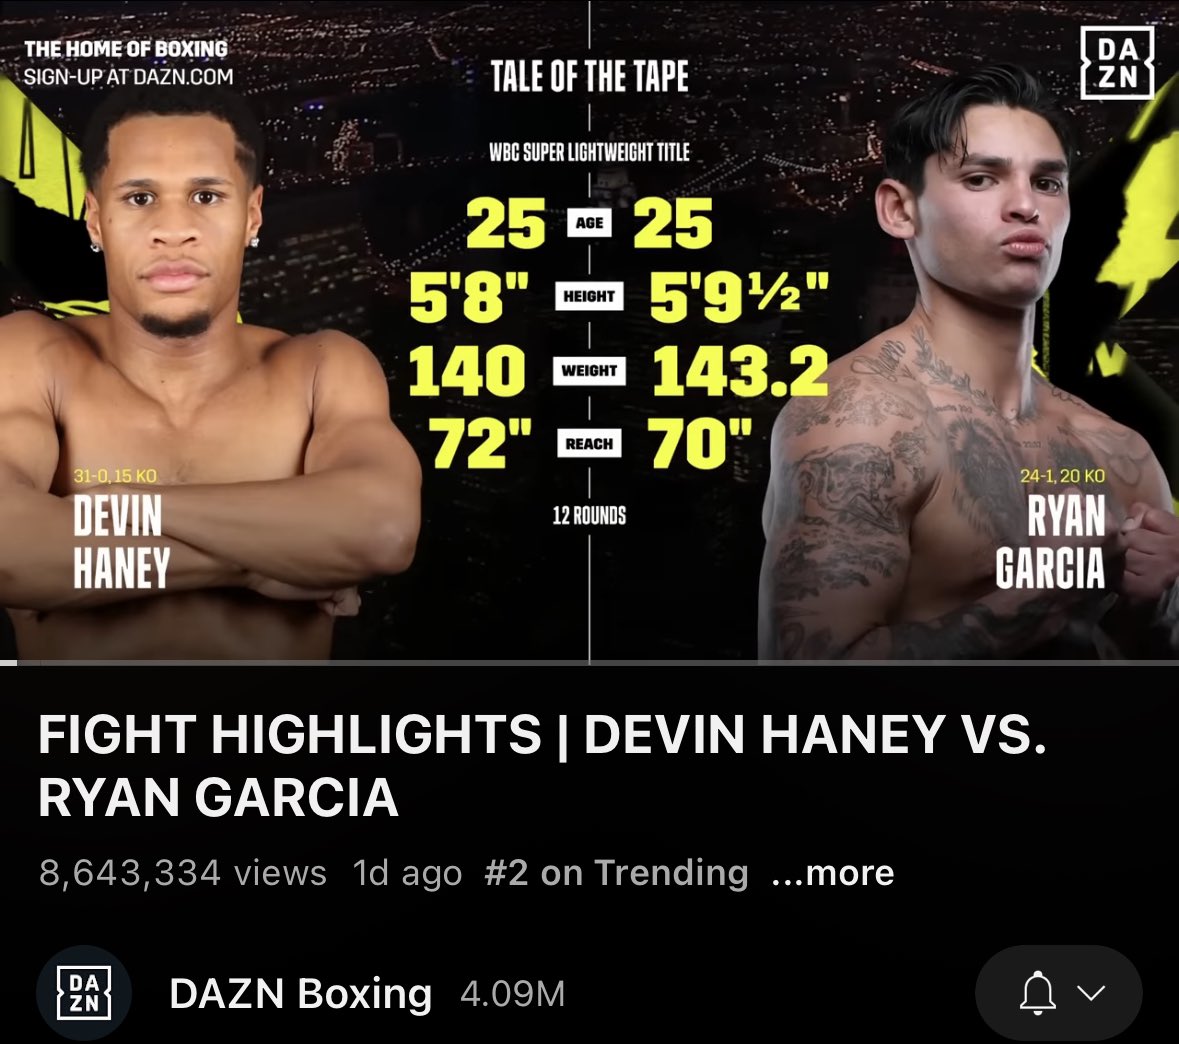 #HaneyGarcia 8.6M views in one day and #2 trending on YouTube. It will end up as a big success for Goldenboy and DAZN. 👍